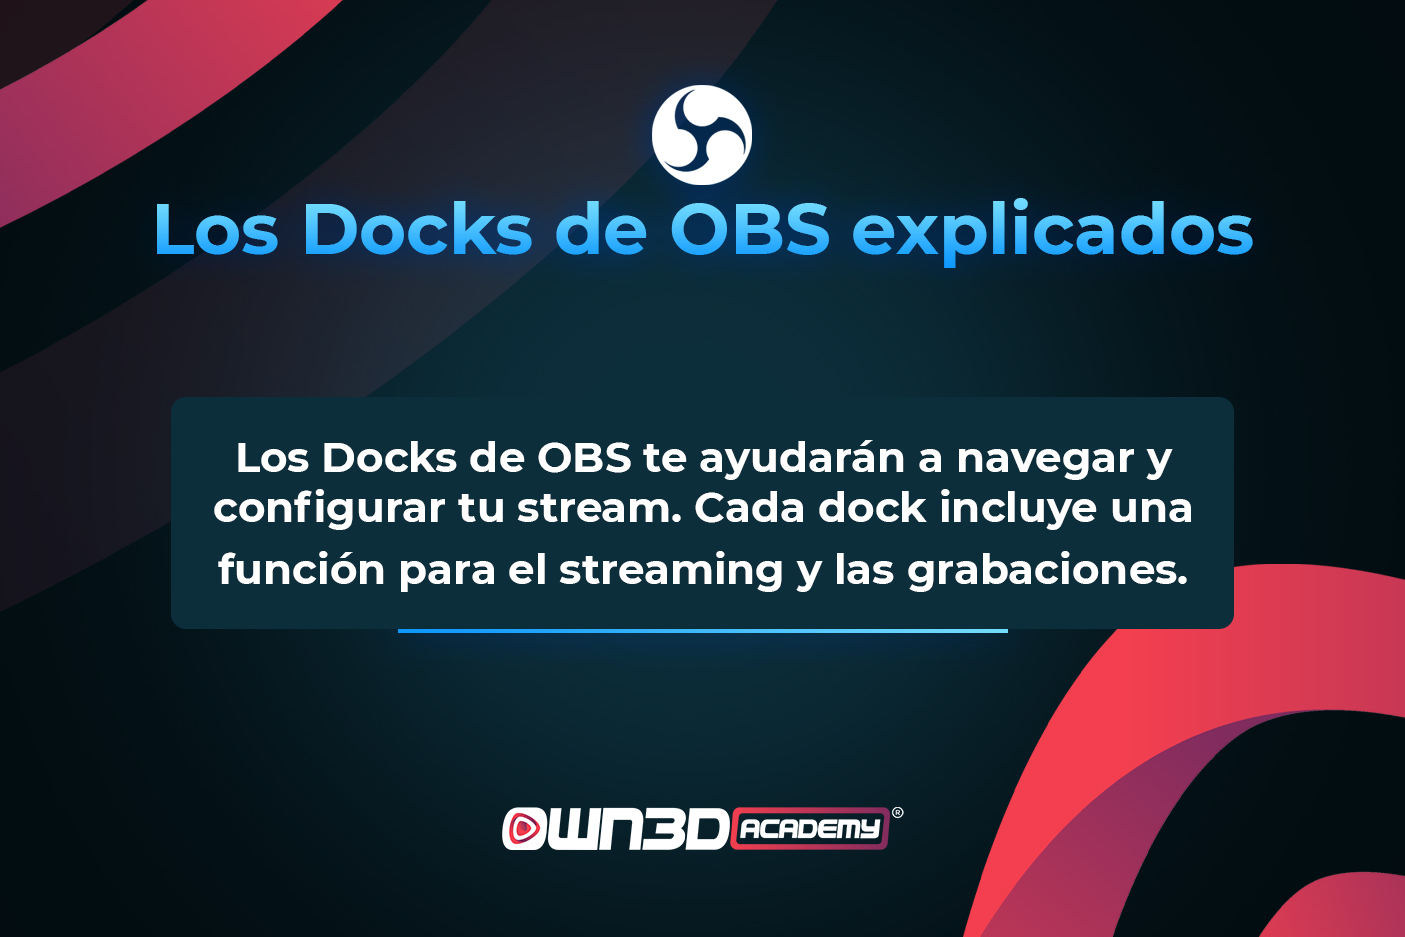 ES_L1_OBS-DOCKS-EXPLAINED_what-docks-are.jpg